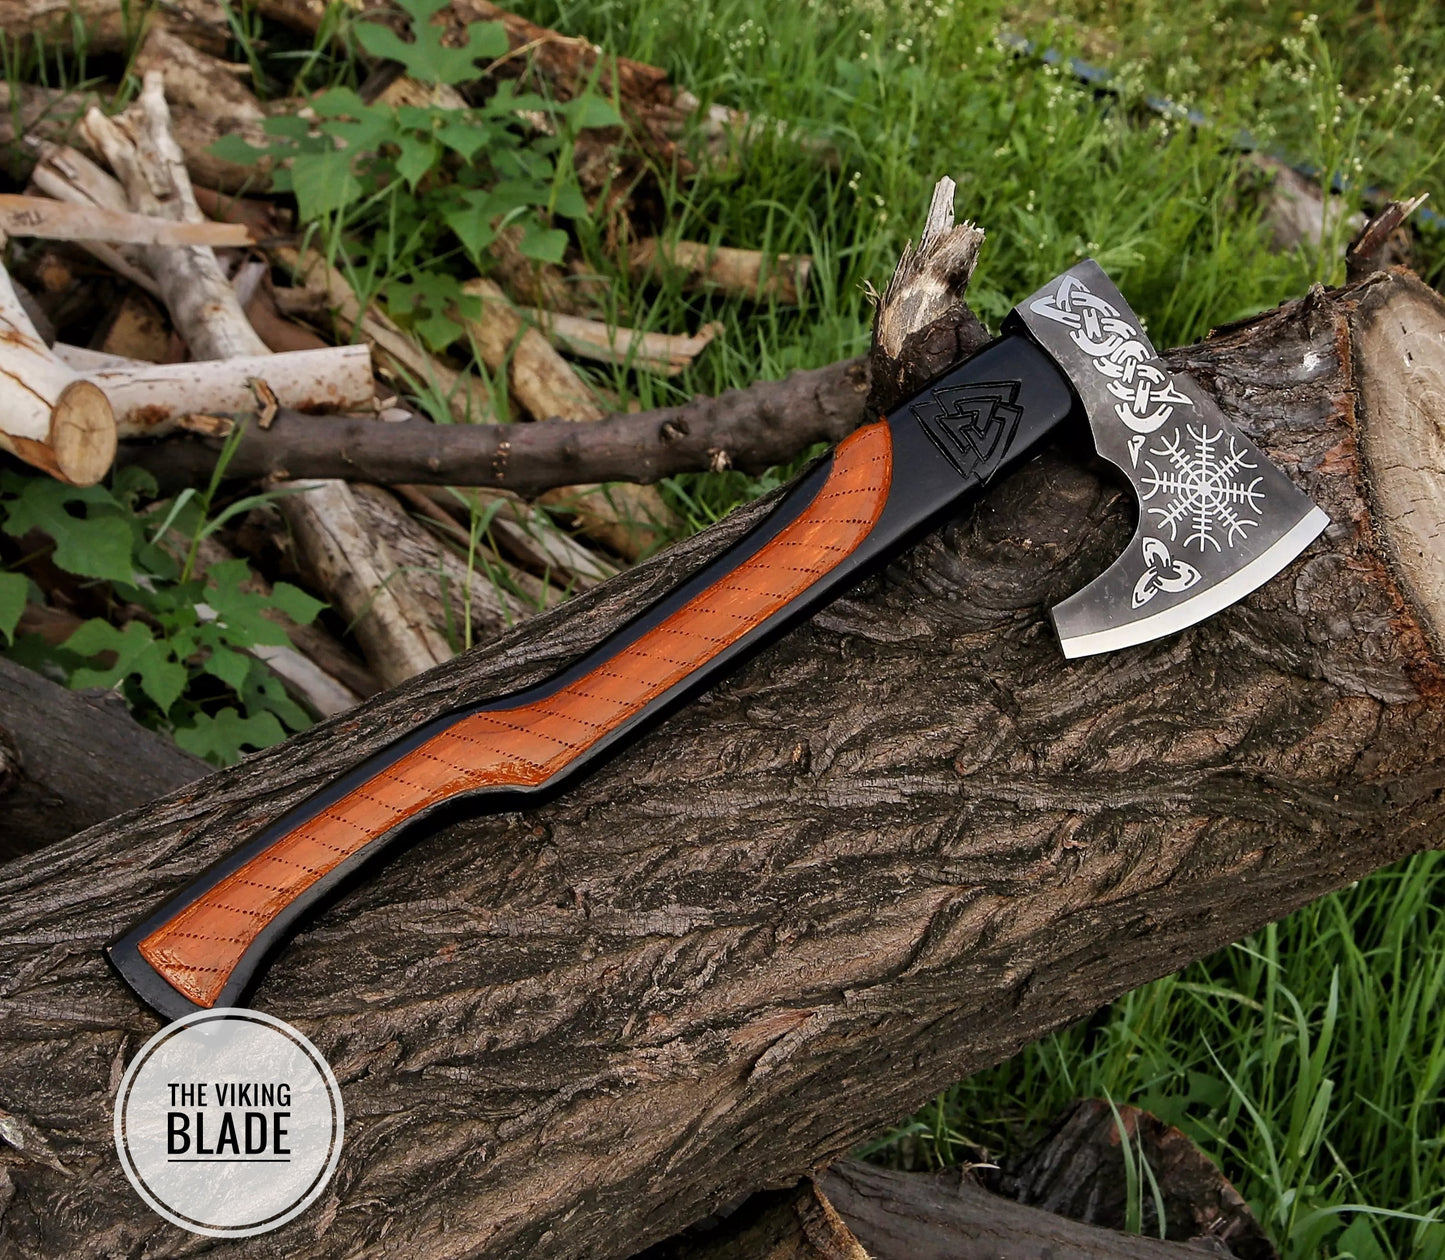 Custom Hand Forged Carbon Steel Vikings Axe With Leather Sheath |The Viking Blade|